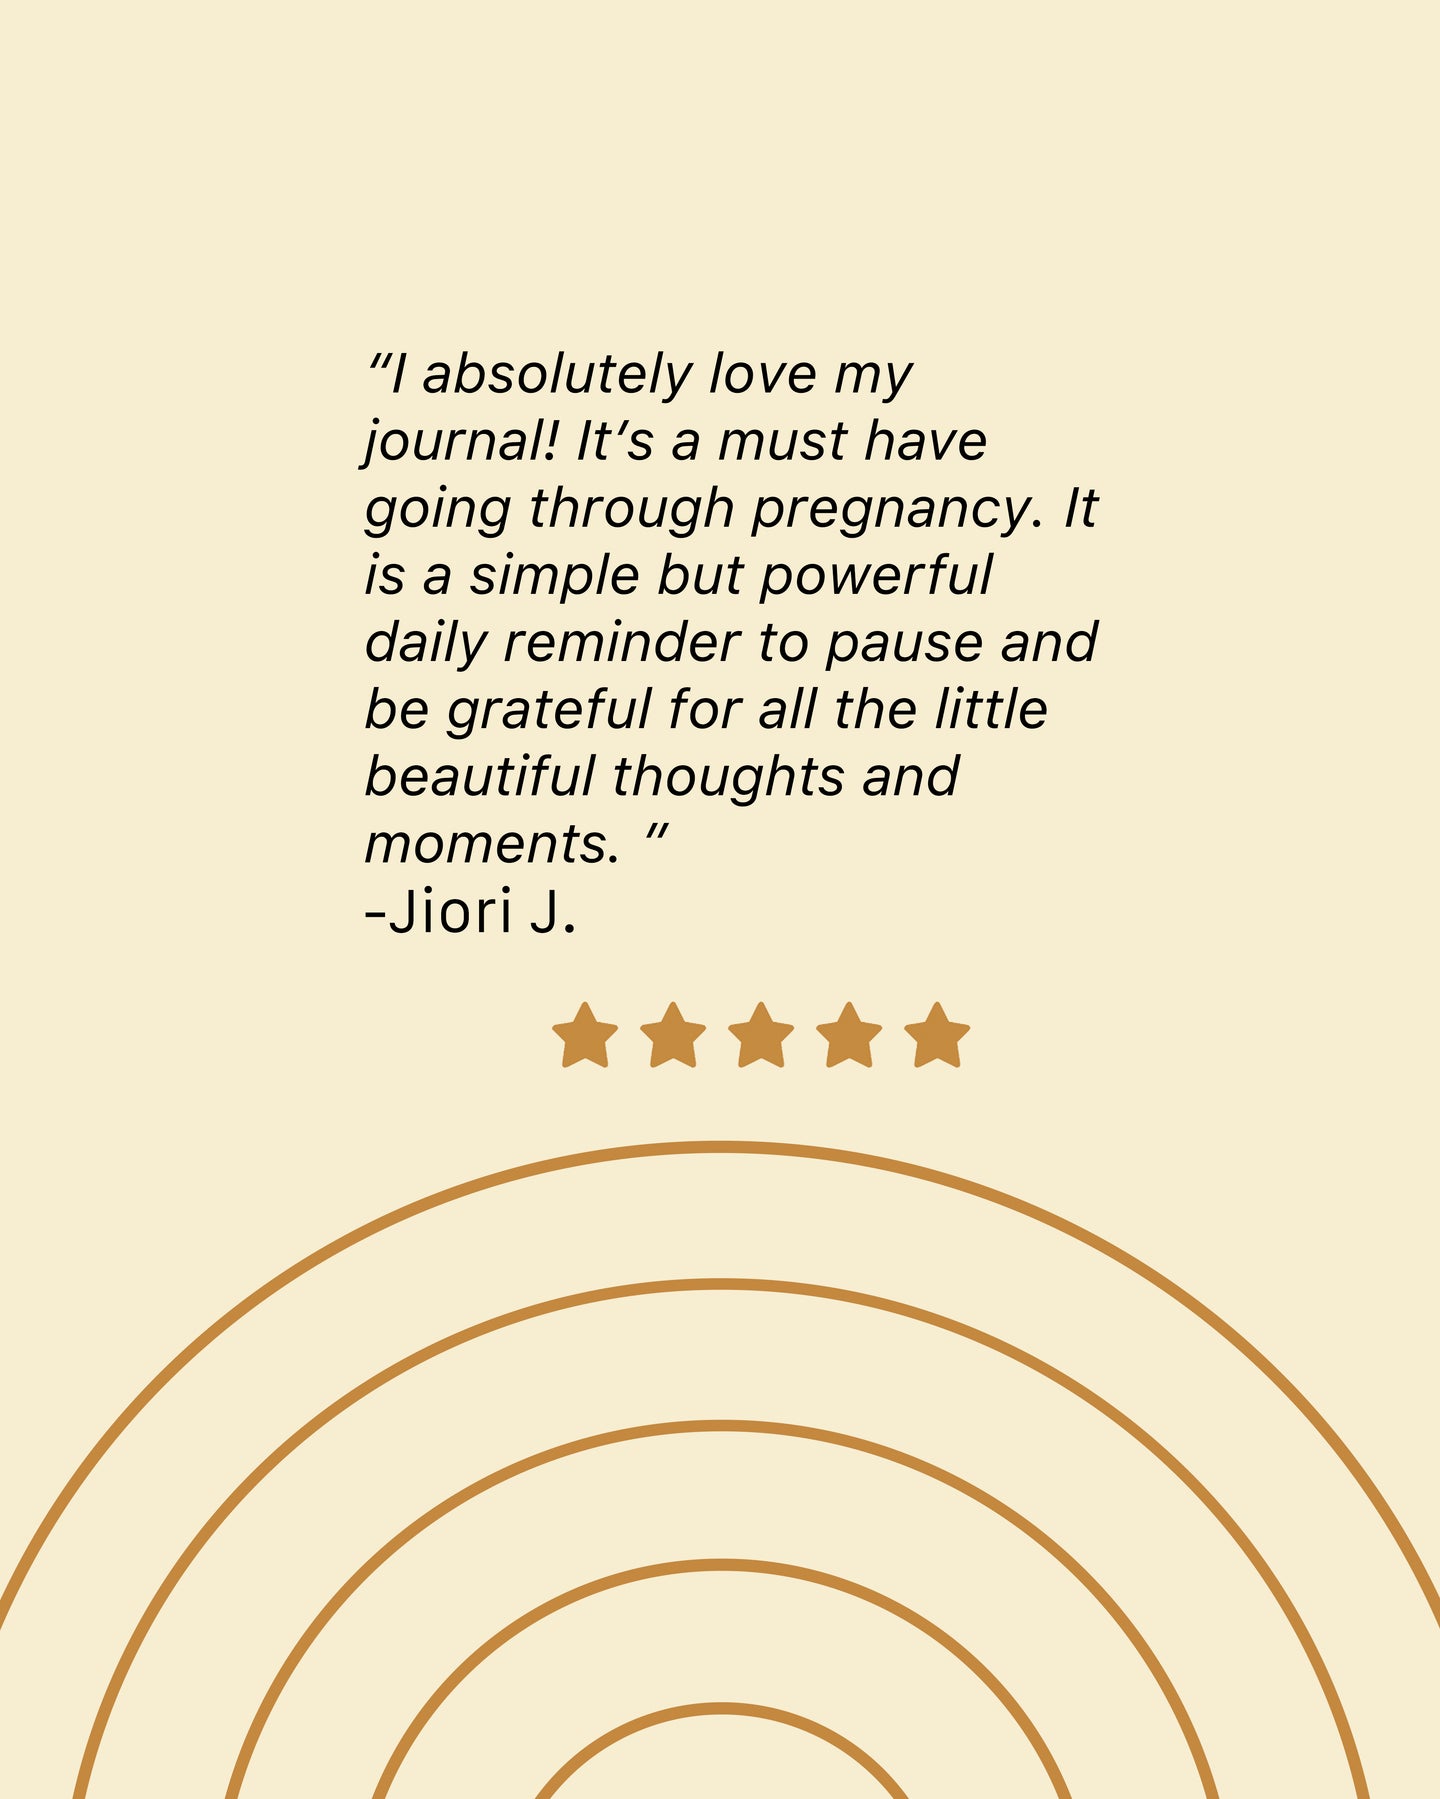 A review left by Jiori J I absolutely love my journal it's a must have going through pregnancy It is a simple but powerful daily reminder to pause and be grateful for all the little beautiful thoughts and moments